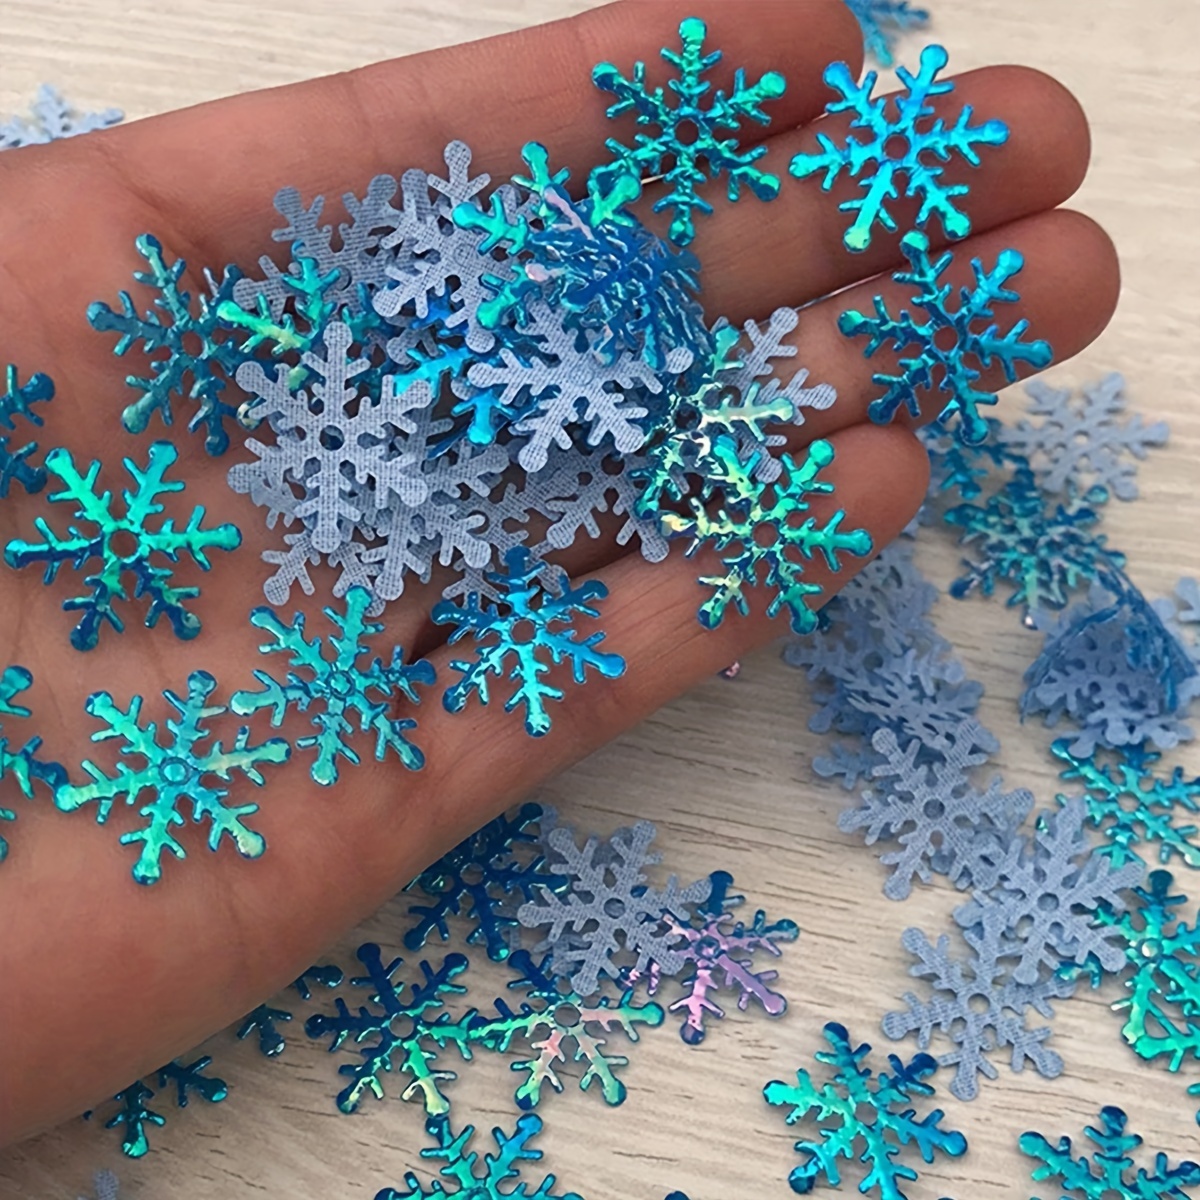 300pcs/pack, Snowflake Design Throwing Confetti, Snowflakes Confetti For  Christmas Wedding Birthday Holiday Party Table Decorations Supplies,  Snowflak